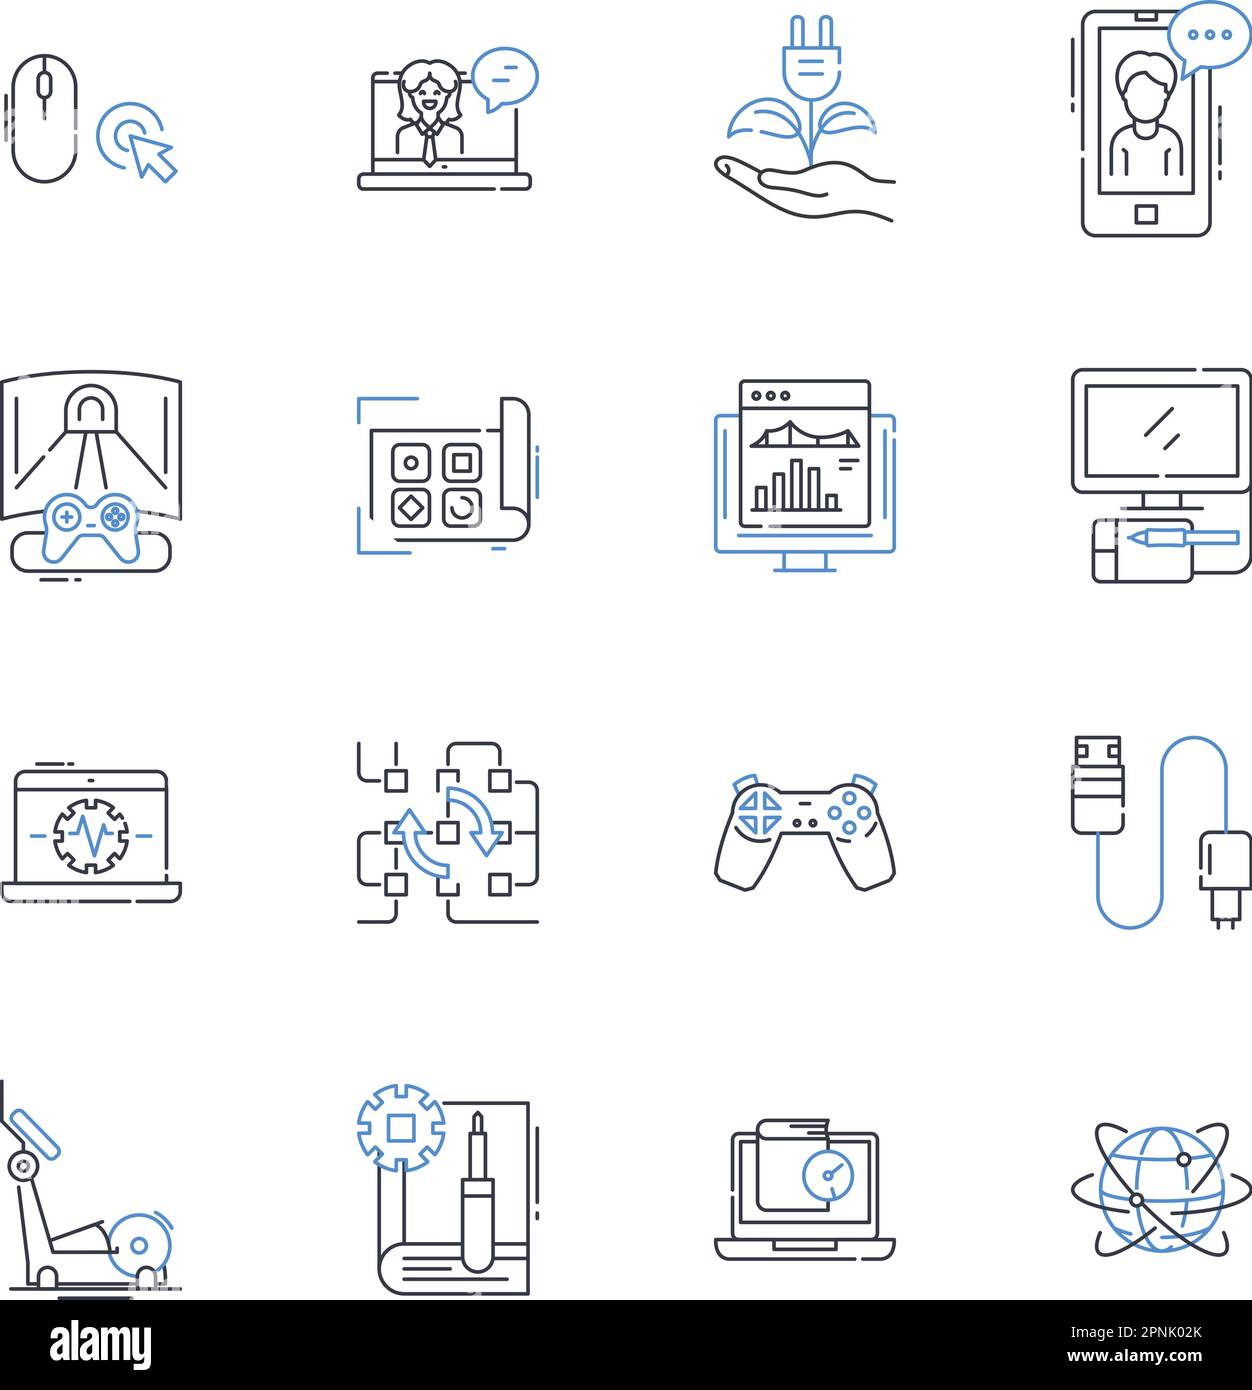 Electrical equipment line icons collection. Transformers, Wires, Capacitors, Resistors, Circuit-breakers, Switches, Fuses vector and linear Stock Vector